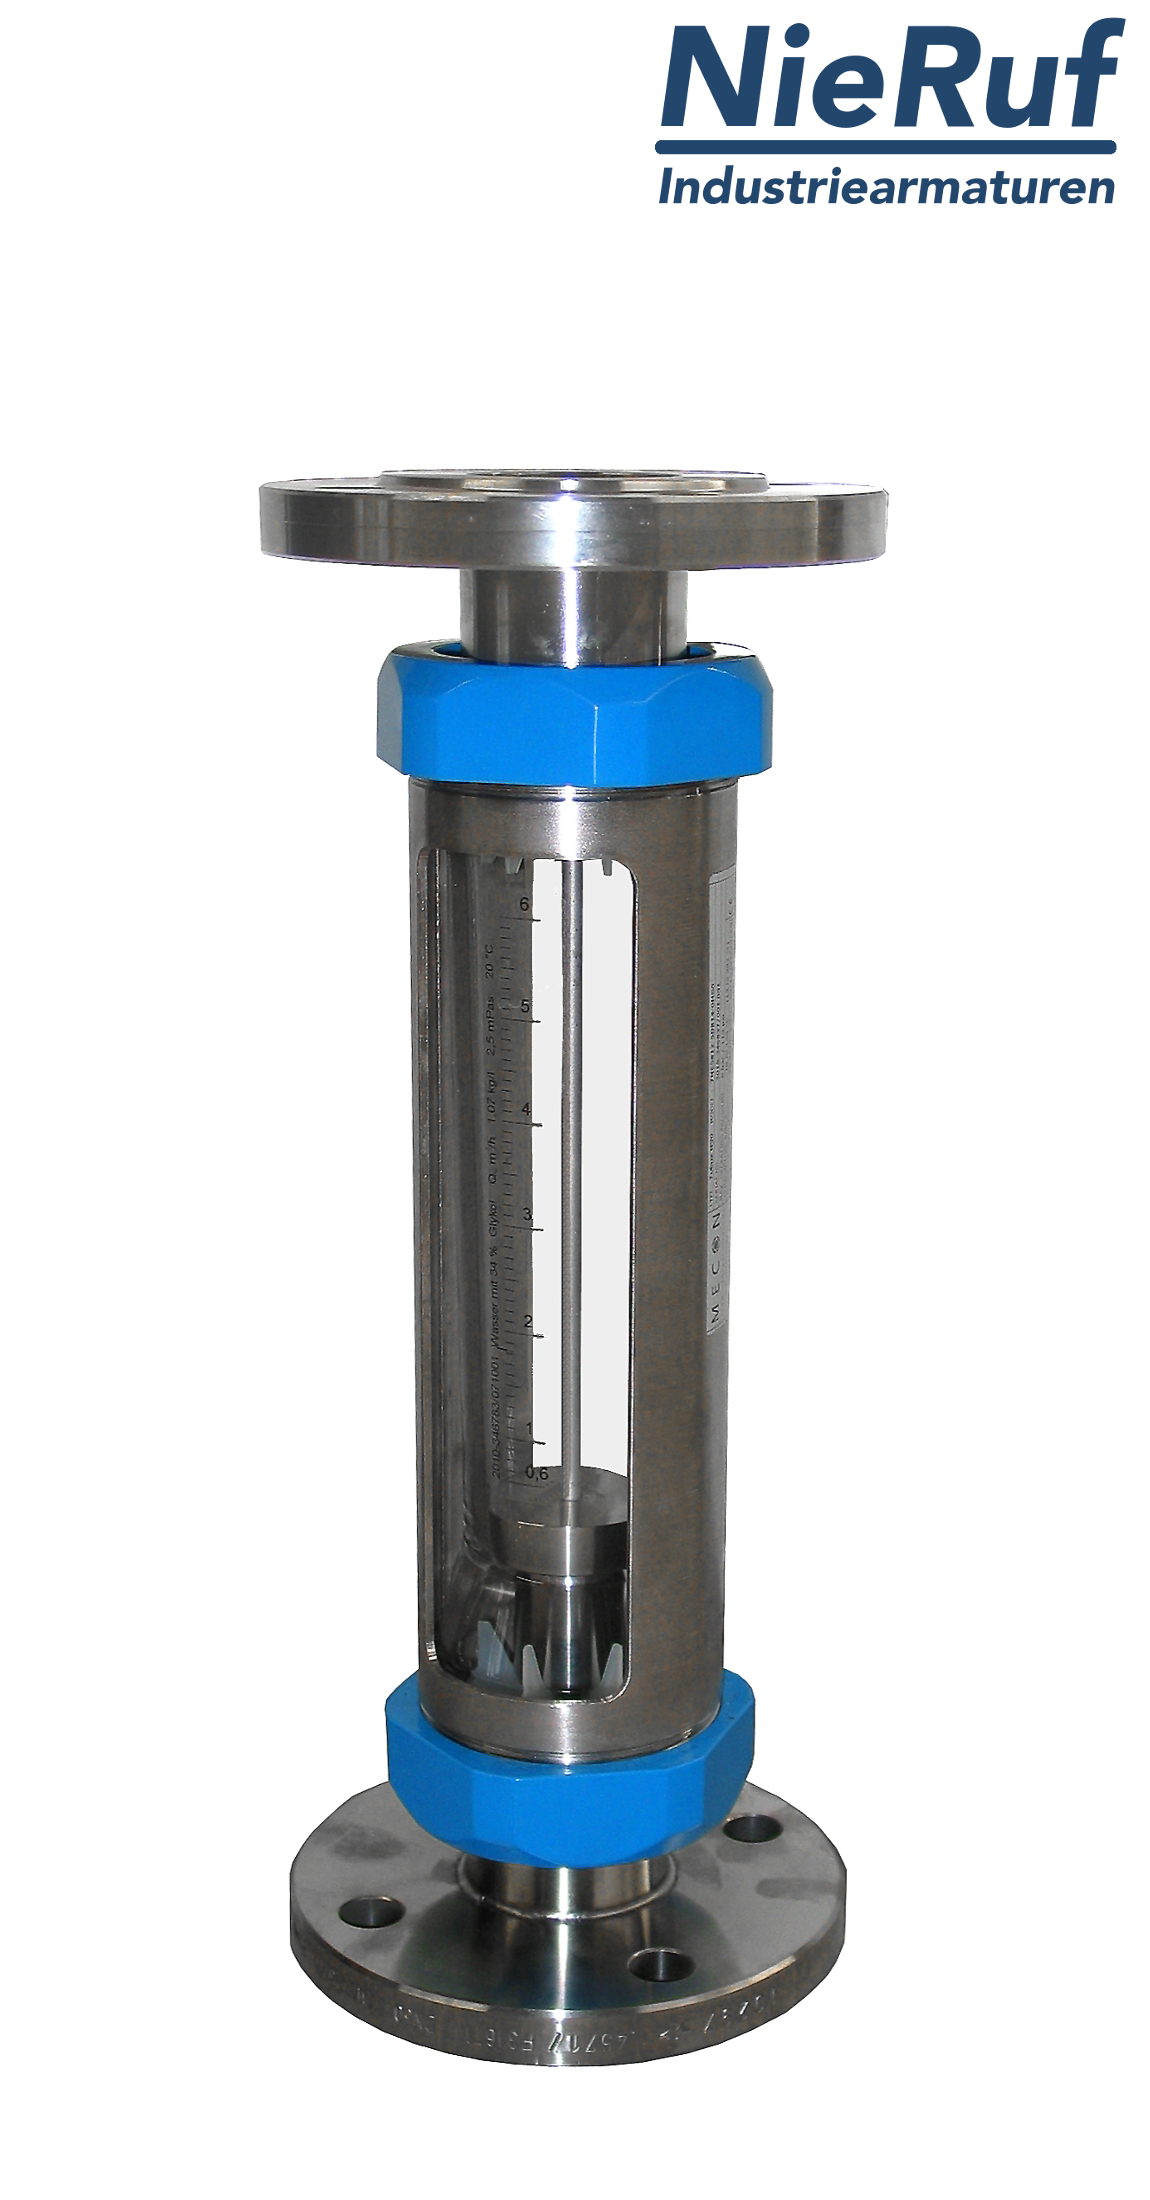 Variable area flowmeter stainless steel + borosilicate flange DN25 20.0 - 200.0 l/h water FKM